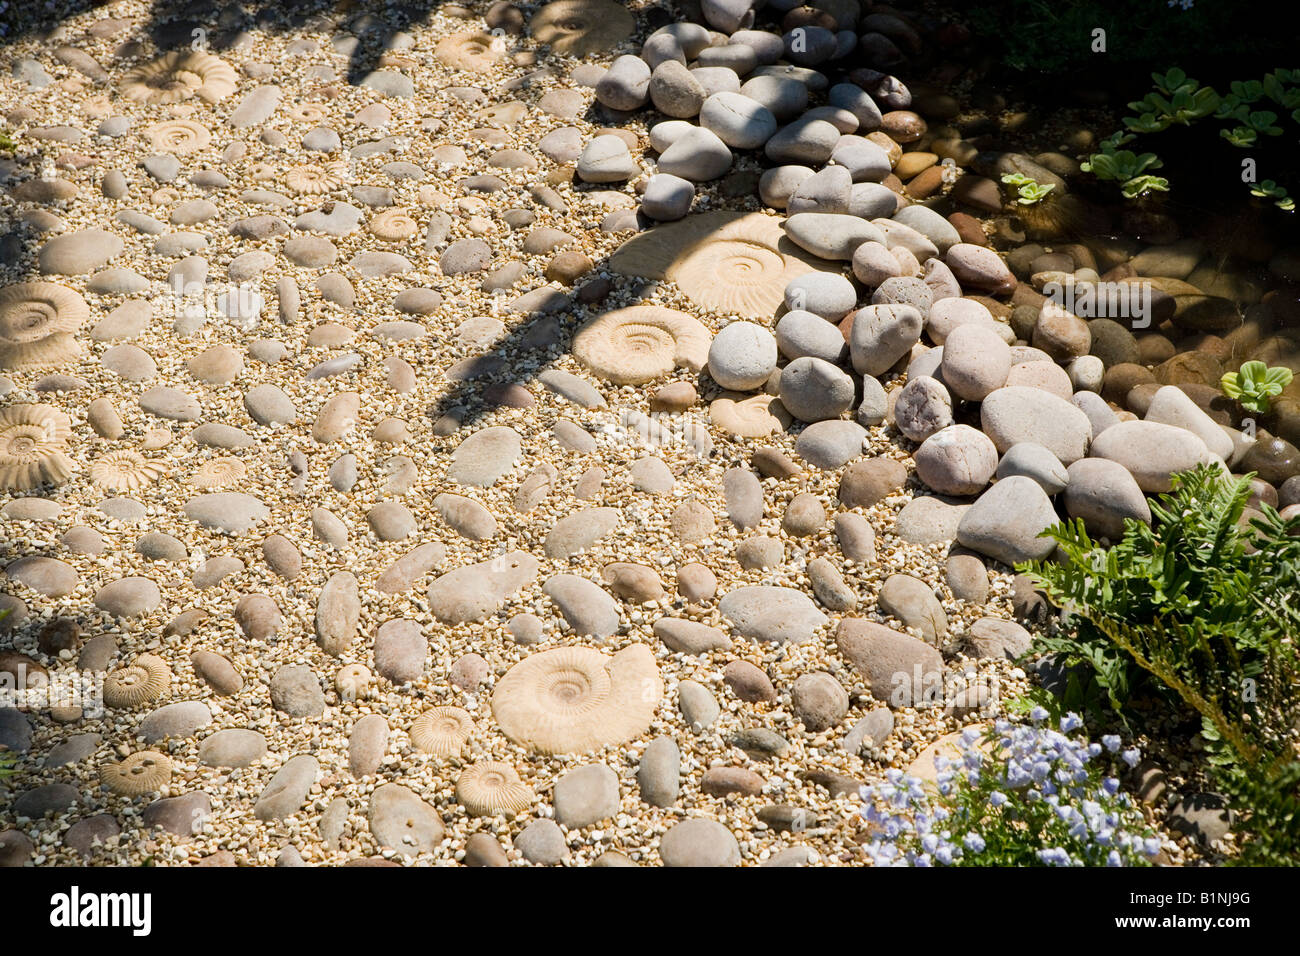 fossils in a pebble garden path Stock Photo